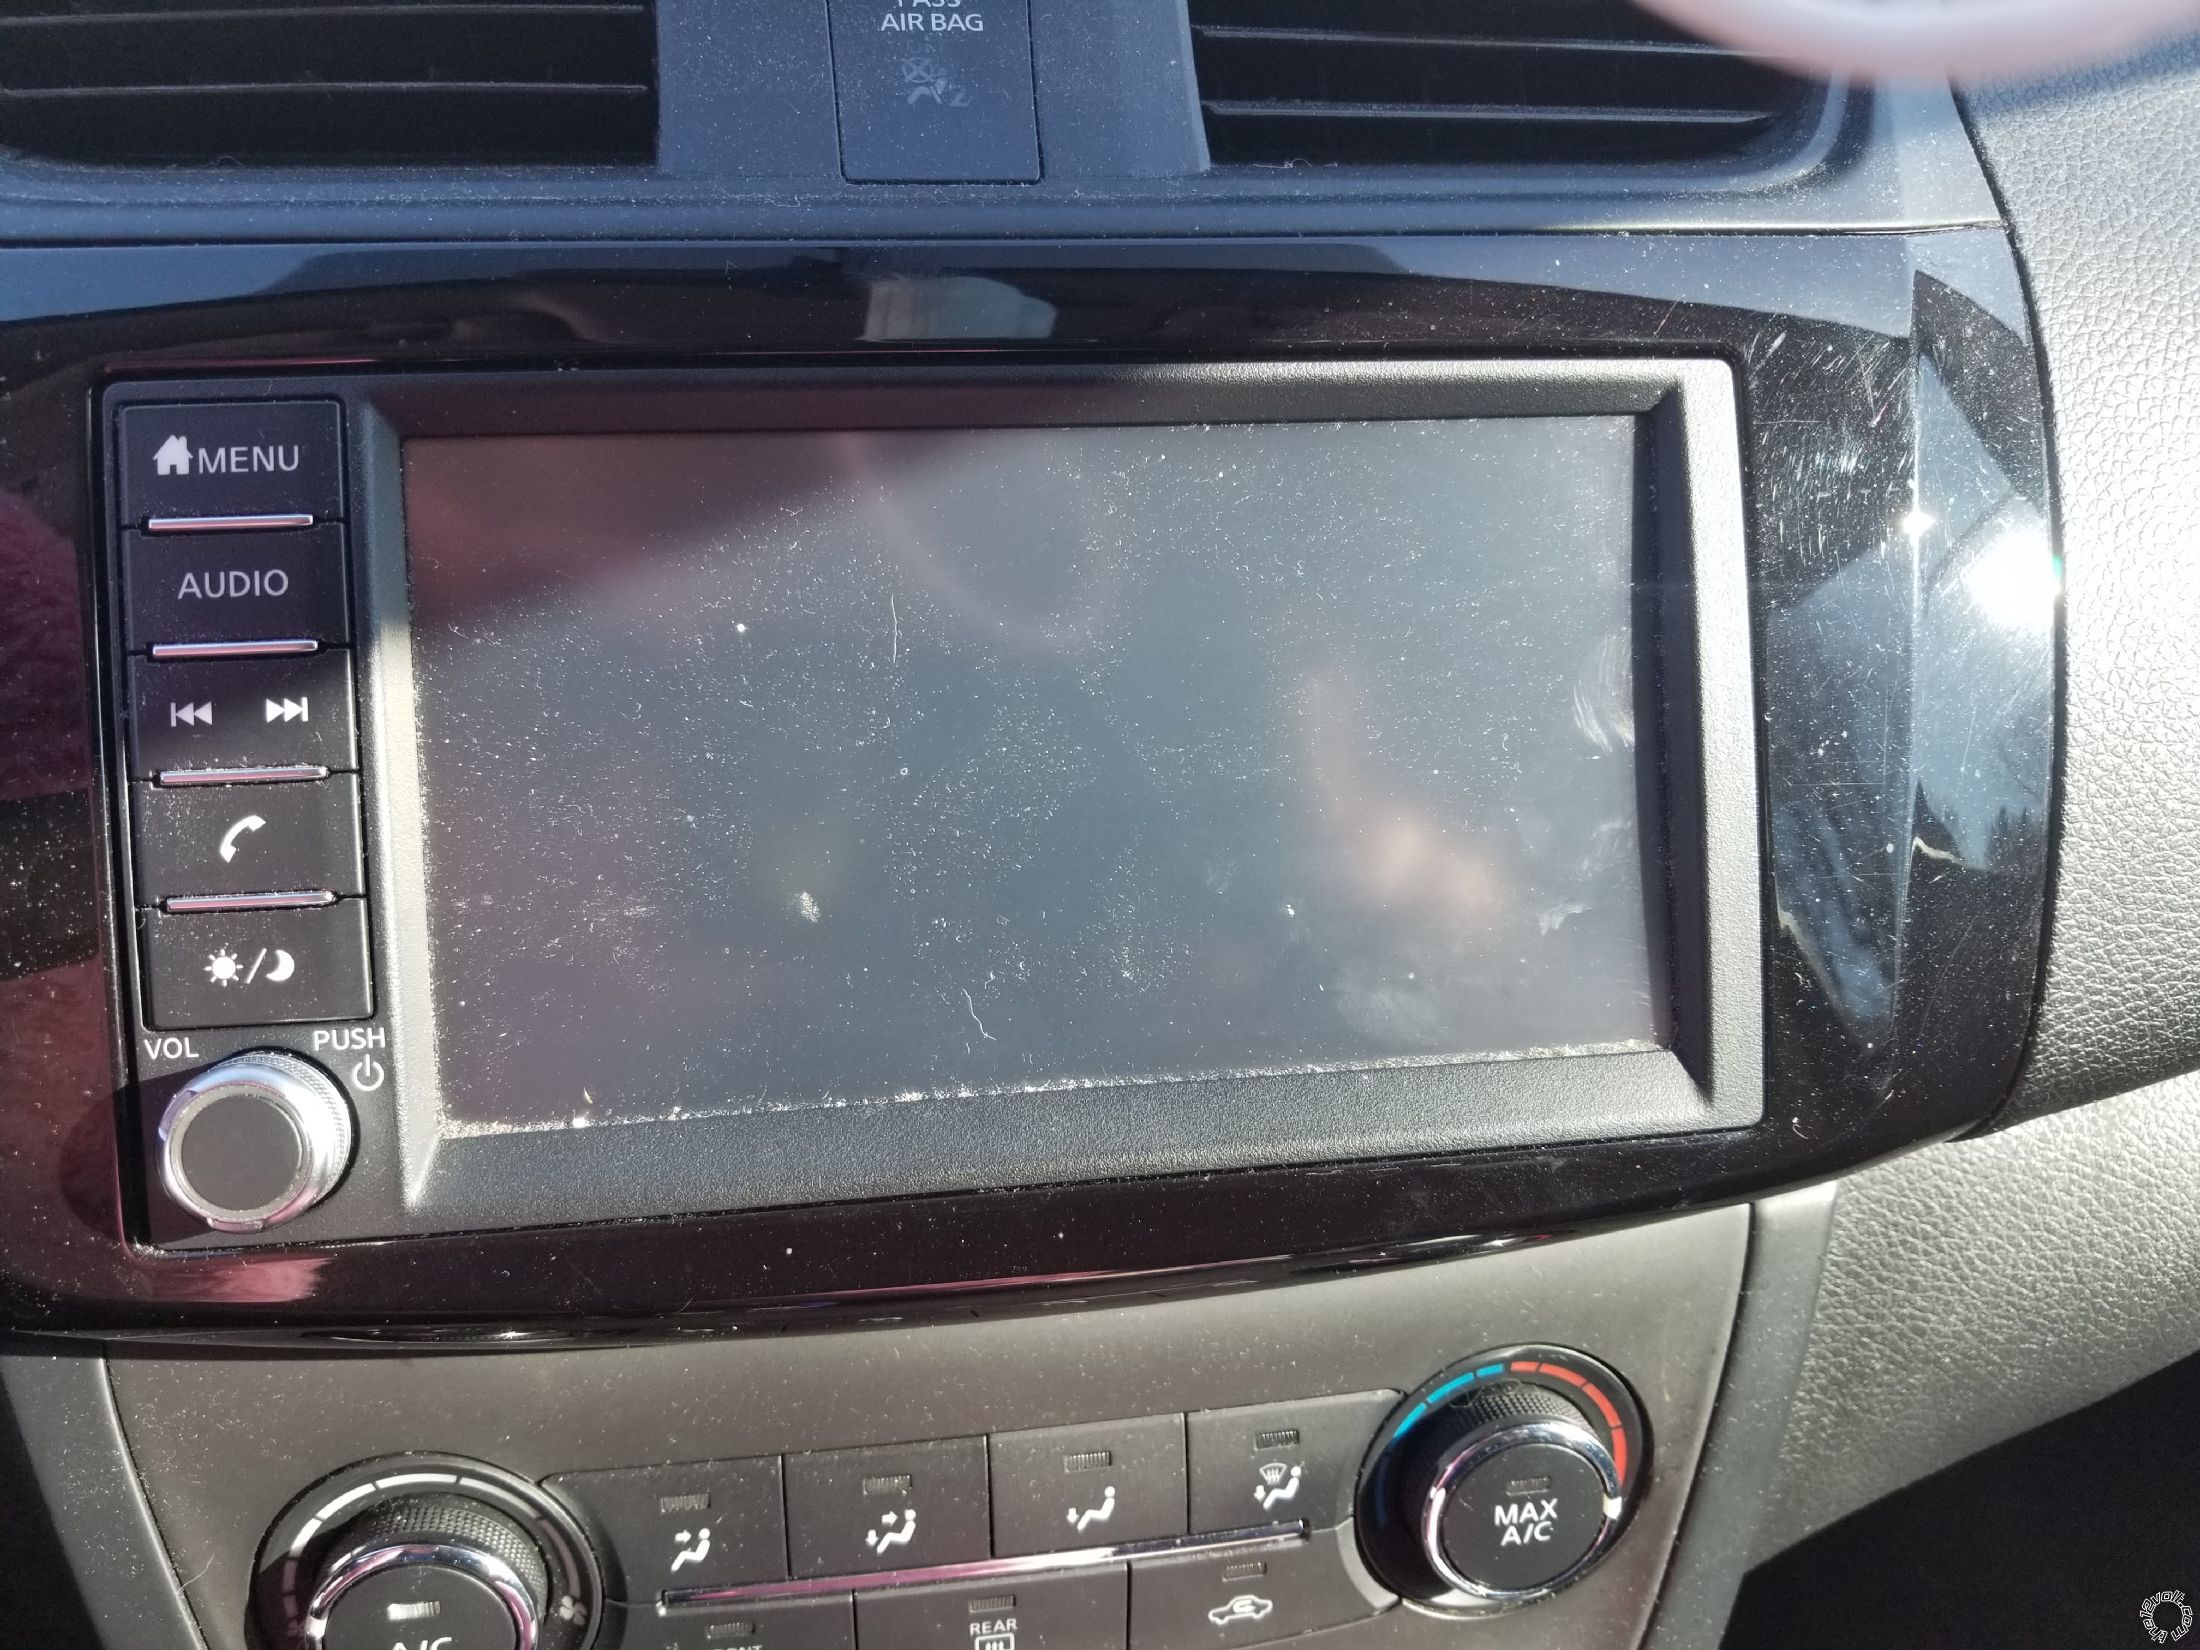 CD Radio For 2019 Nissan Sentra - Last Post -- posted image.